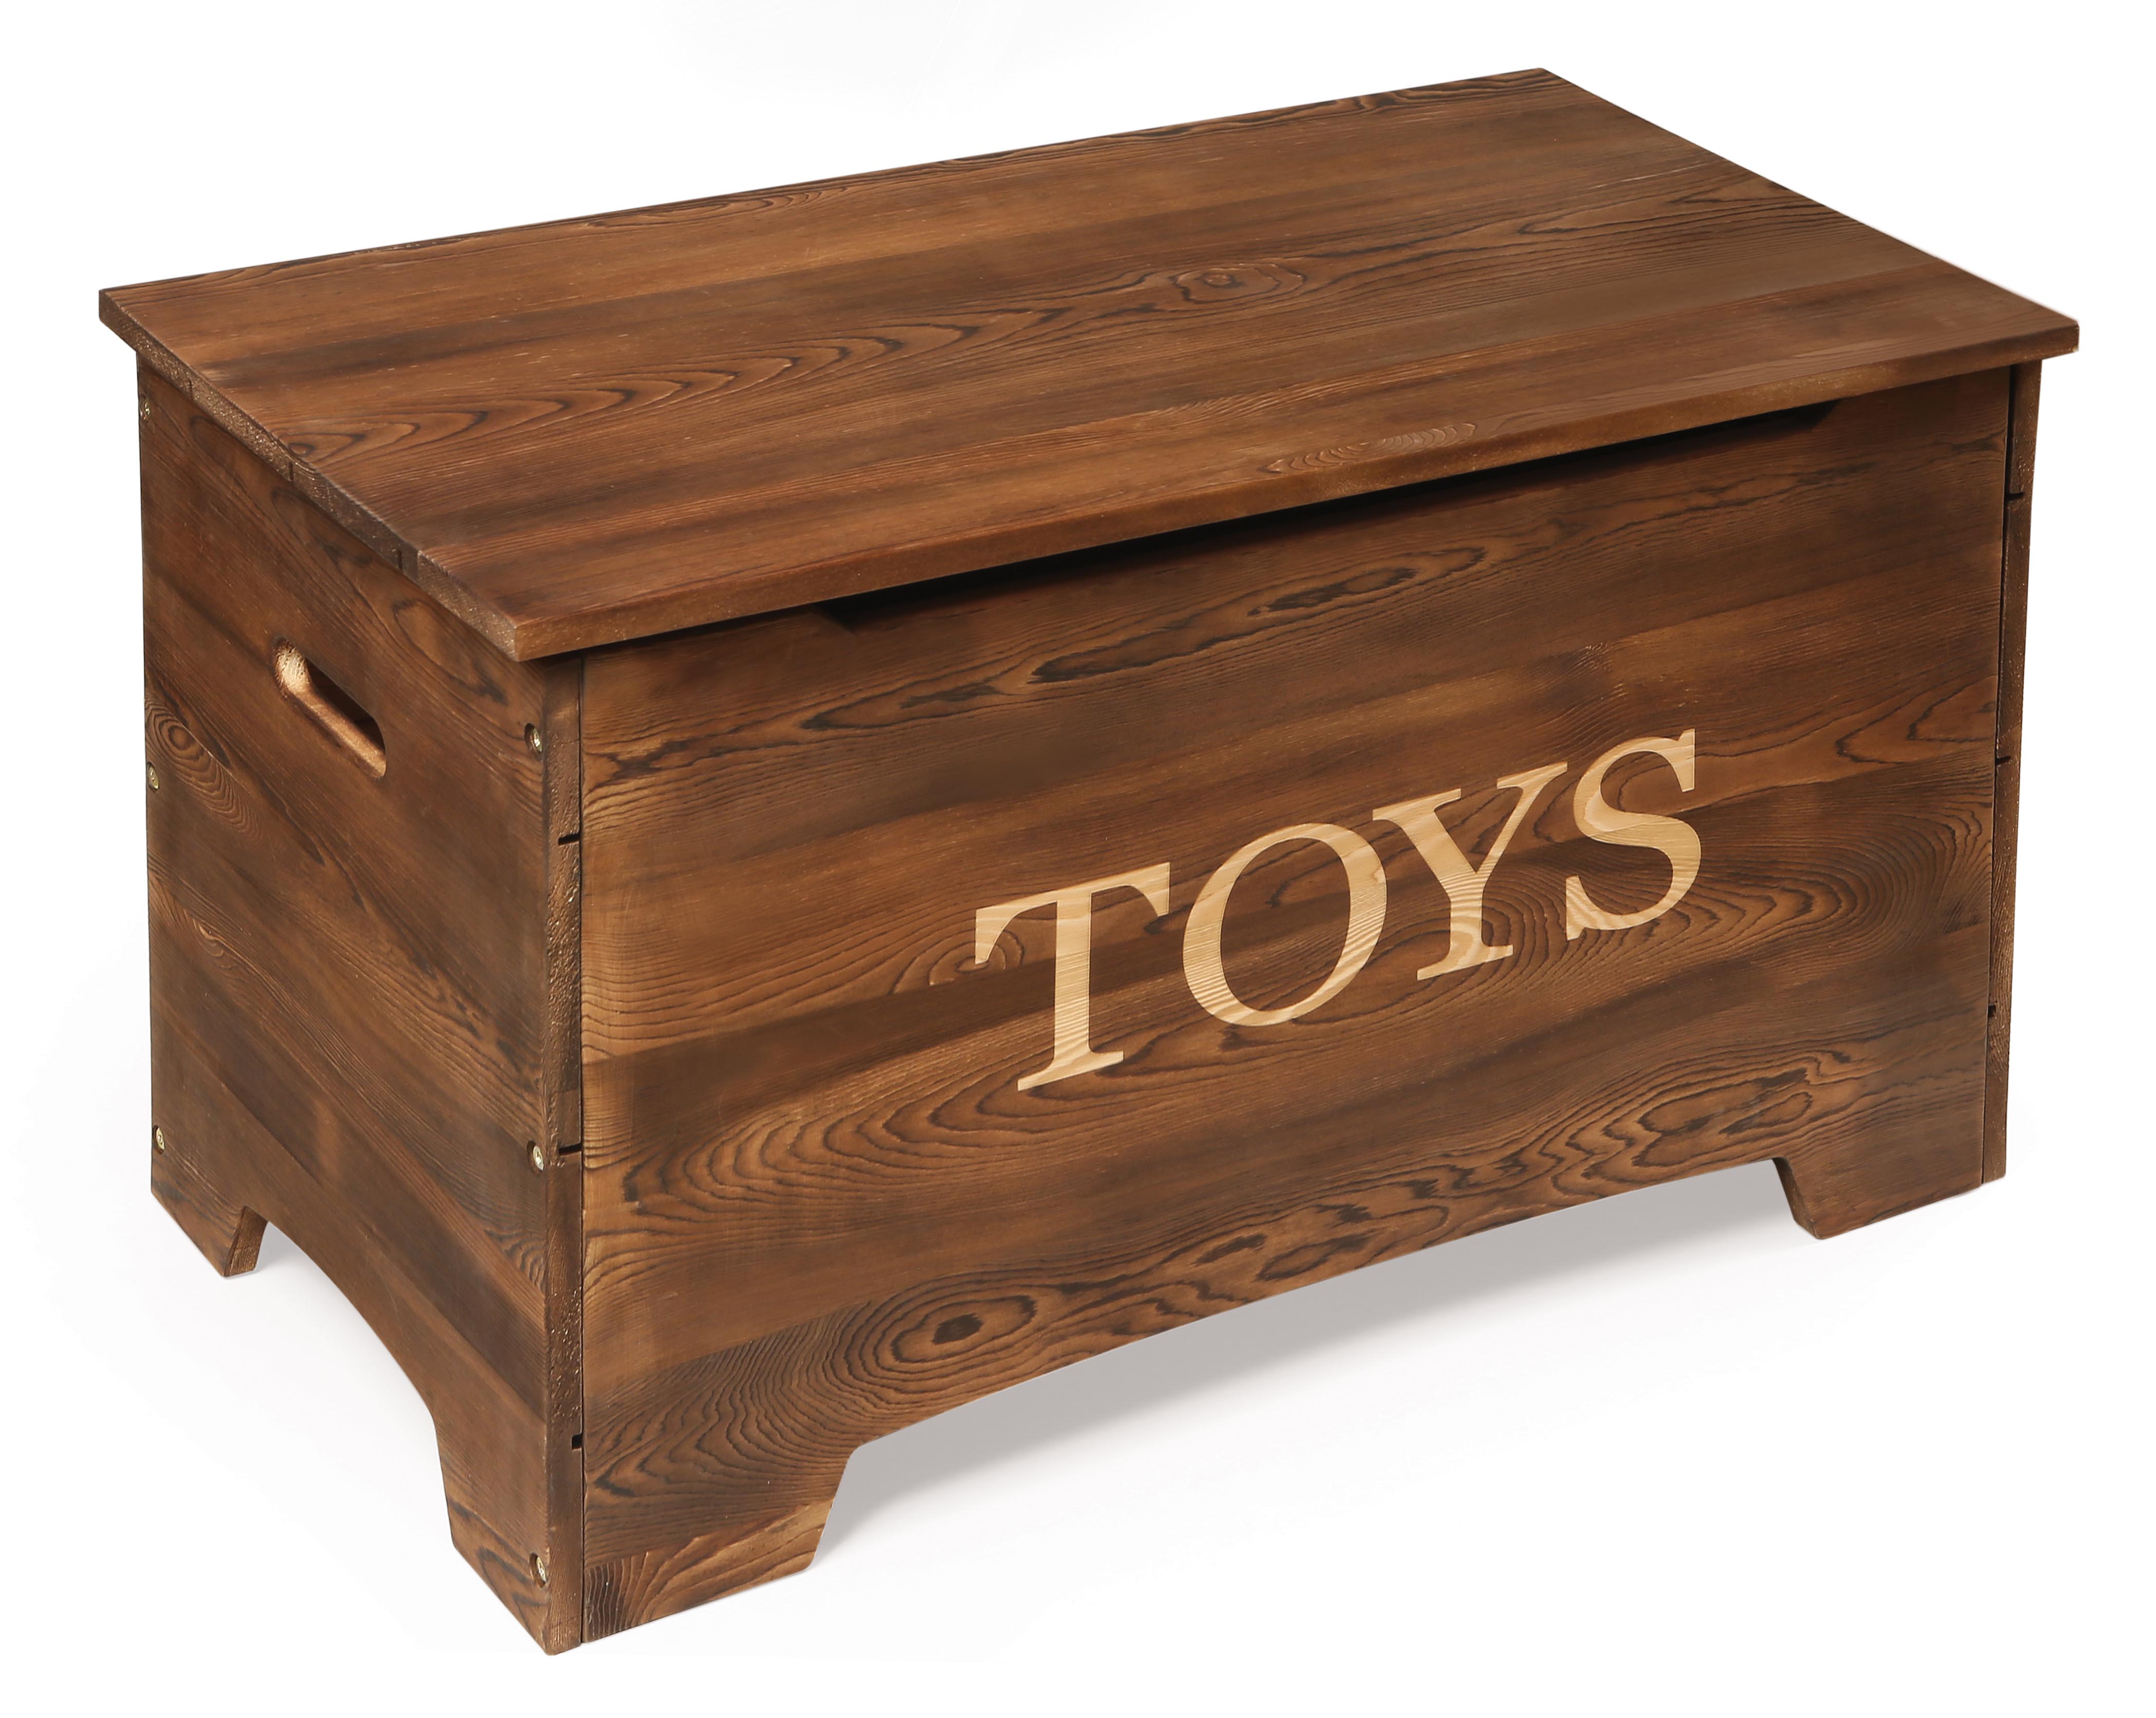 Solid Wood Rustic Toy Box - Caramel Brown